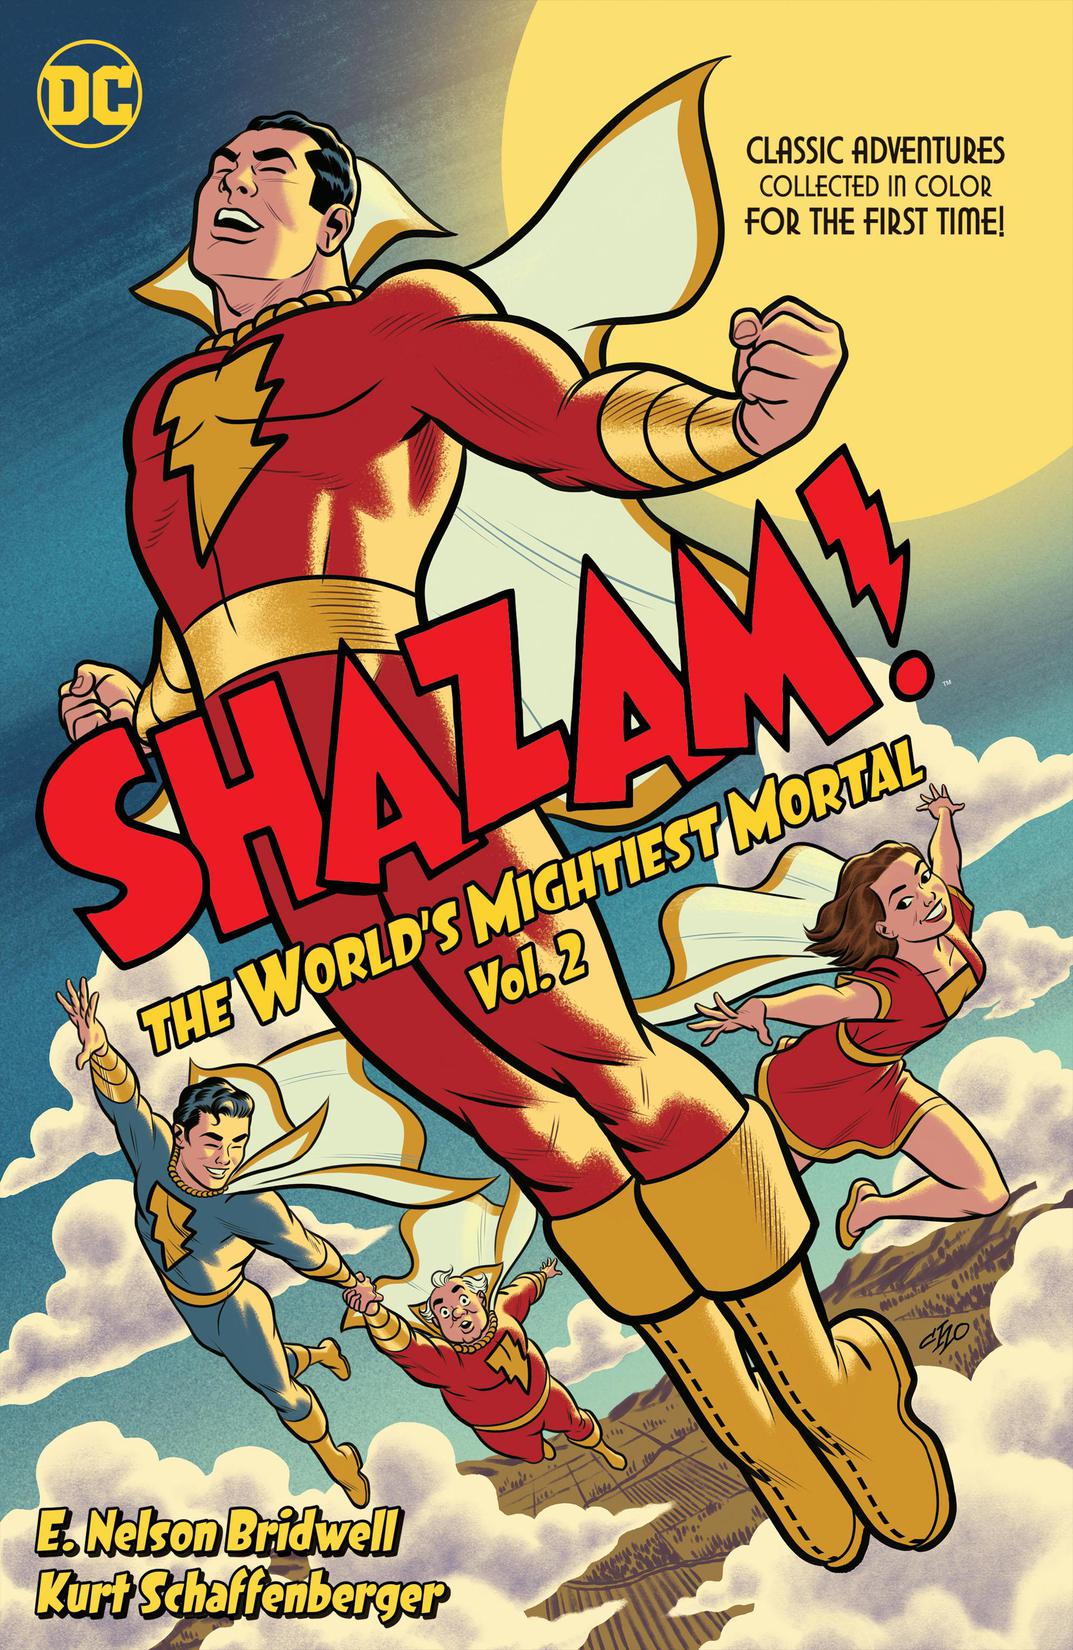 Shazam!: The World's Mightiest Mortal Vol. 2 preview images